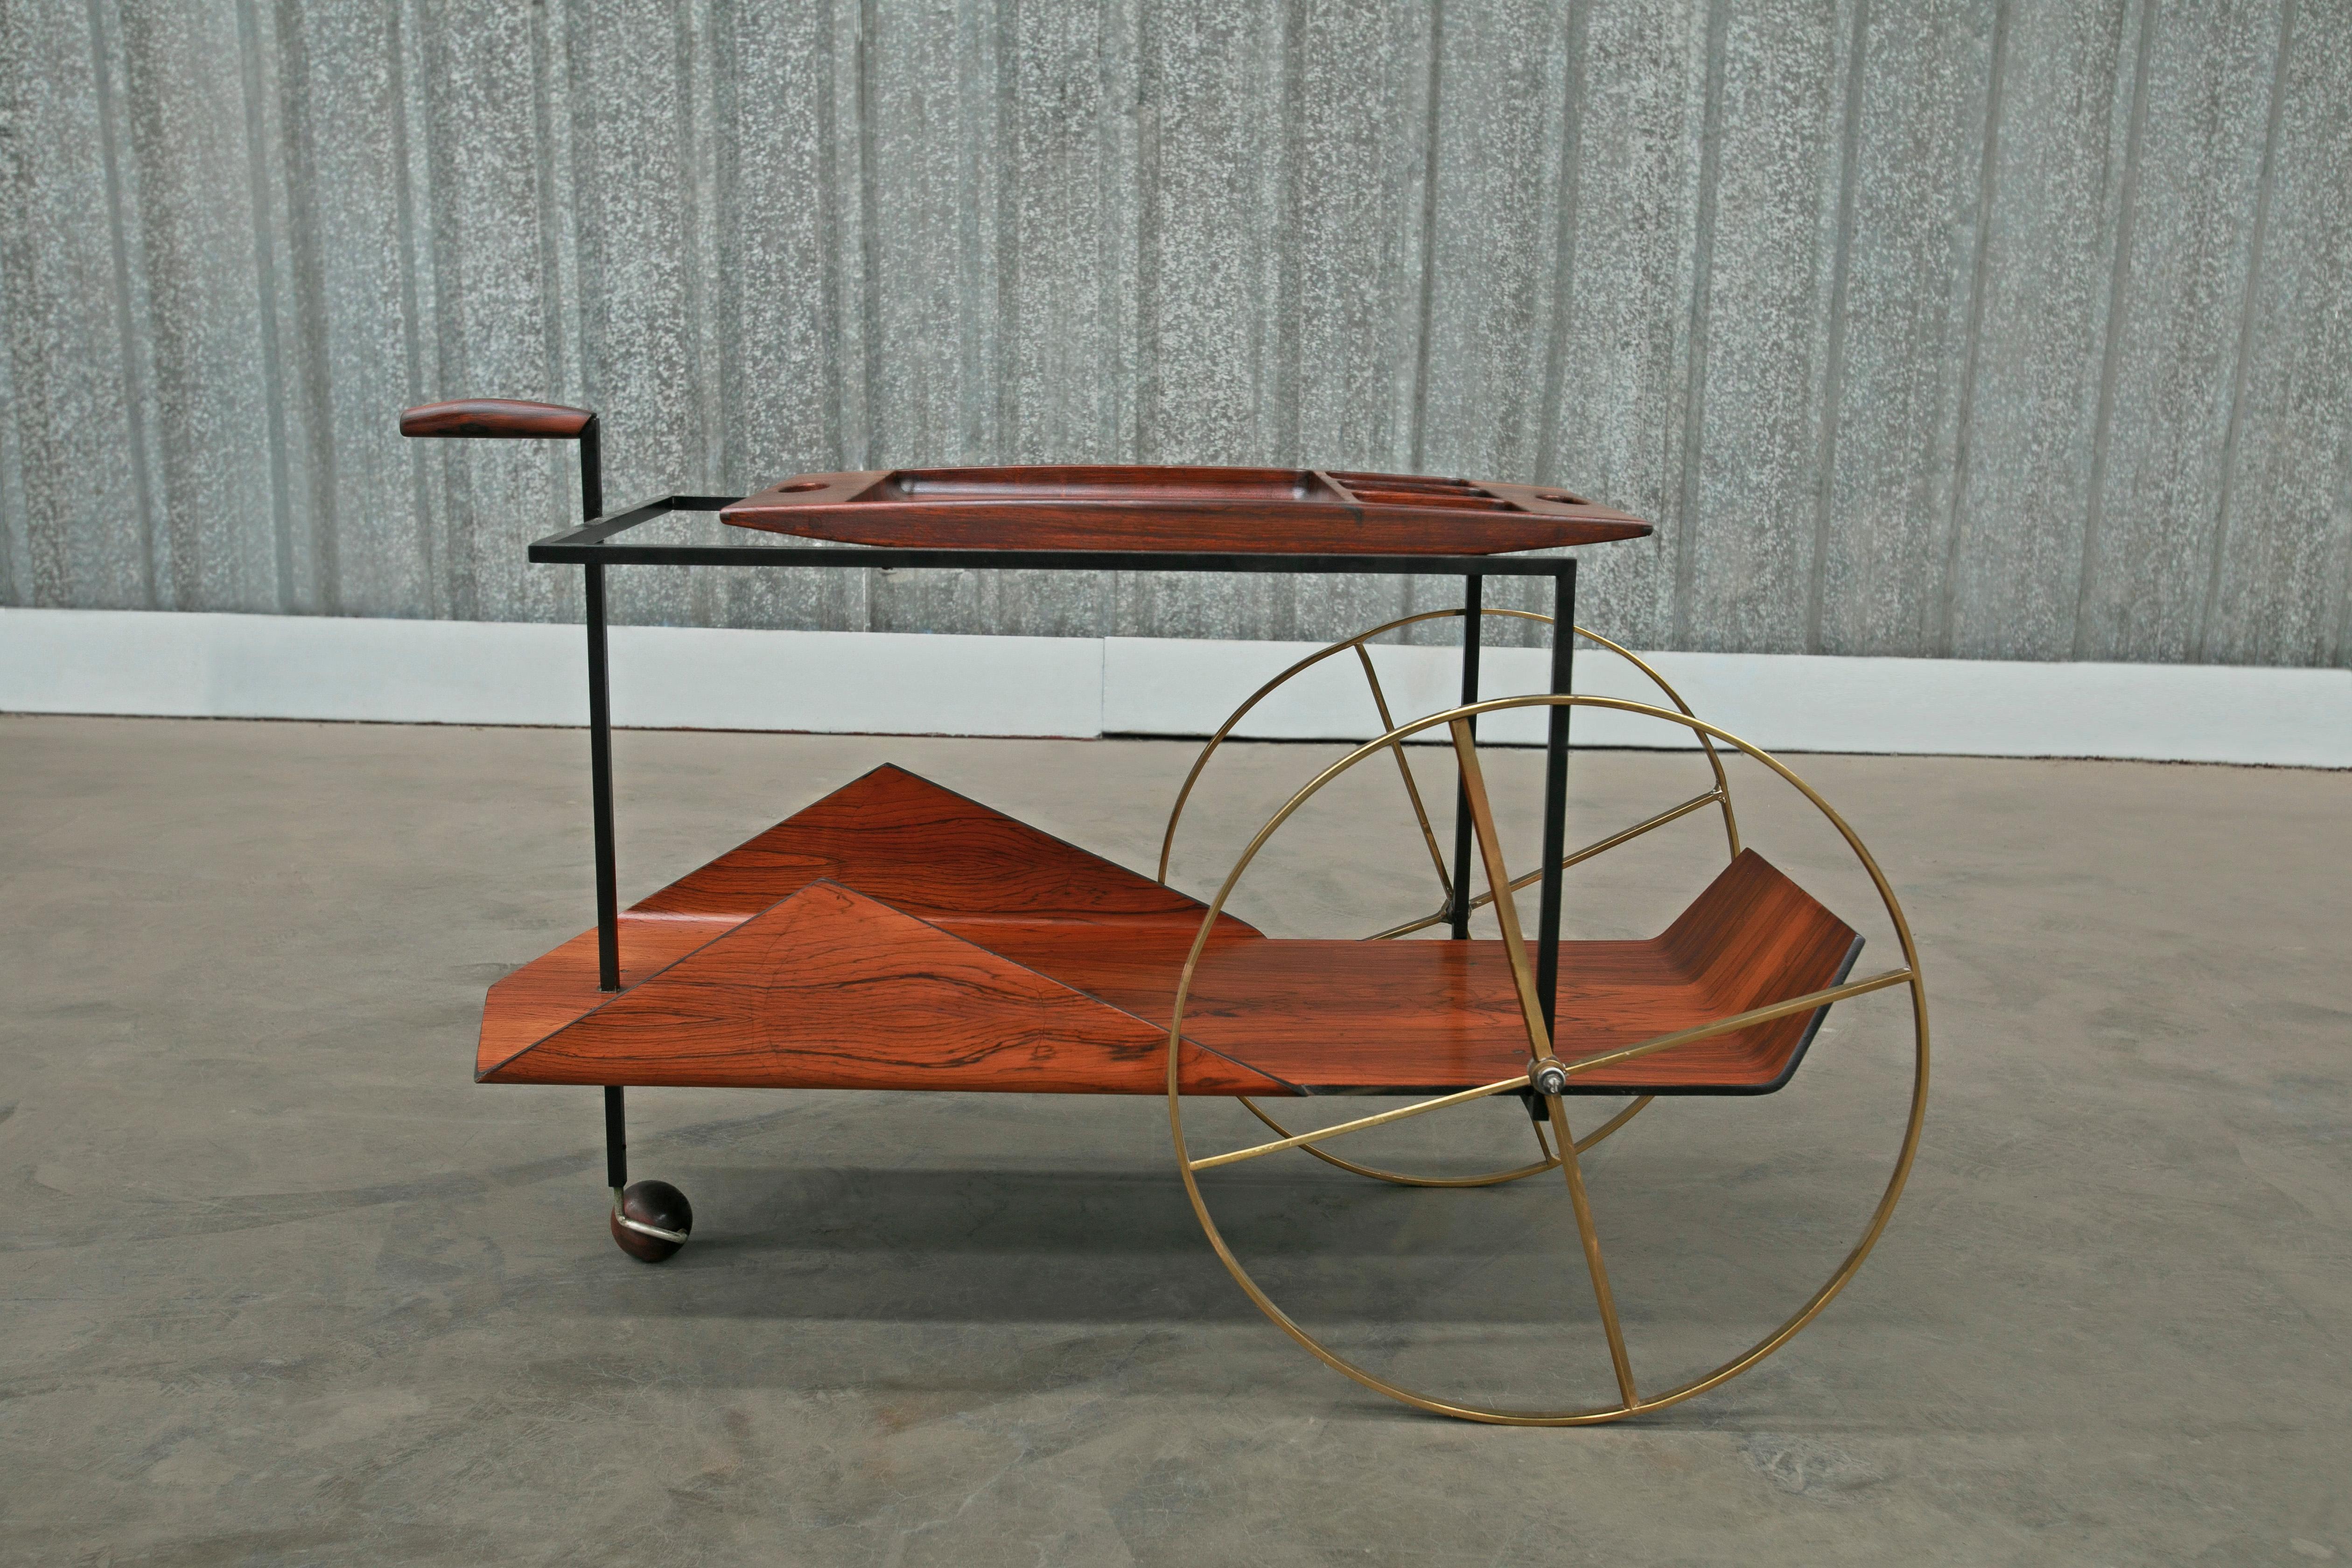 Jorge Zalszupin’s iconic “Carrinho de Cha” bar cart is made with Brazilian rosewood (also known as jacaranda) and features an iron frame and brass wheels. The wood has been expertly refinished and the iron and brass has been repolished to ensure